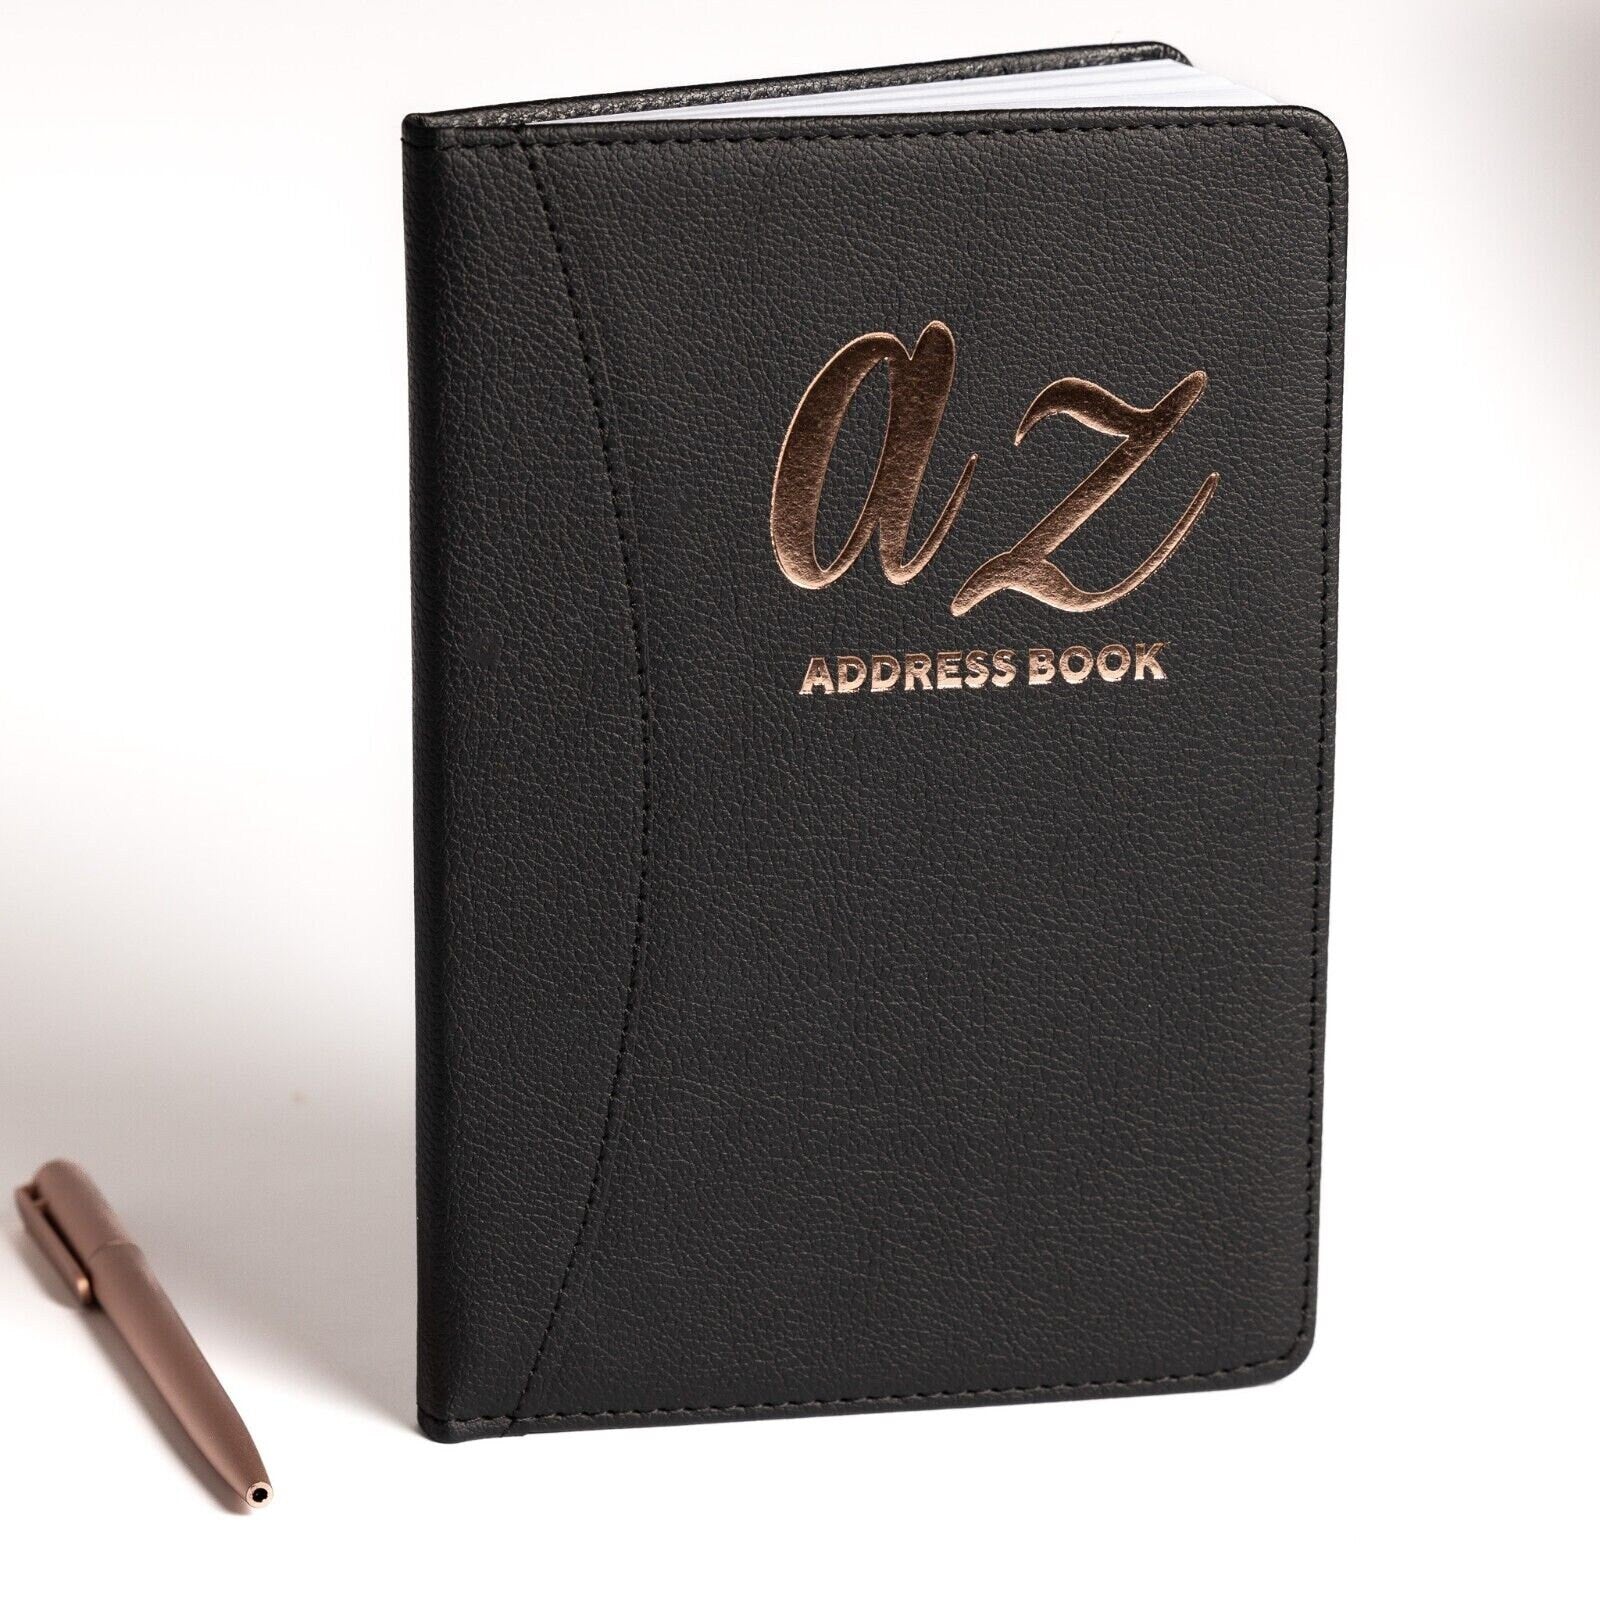 Address & Birthday Telephone Email Book A-Z Index Tabs Hard Back Contact and Pen Keechi & co.